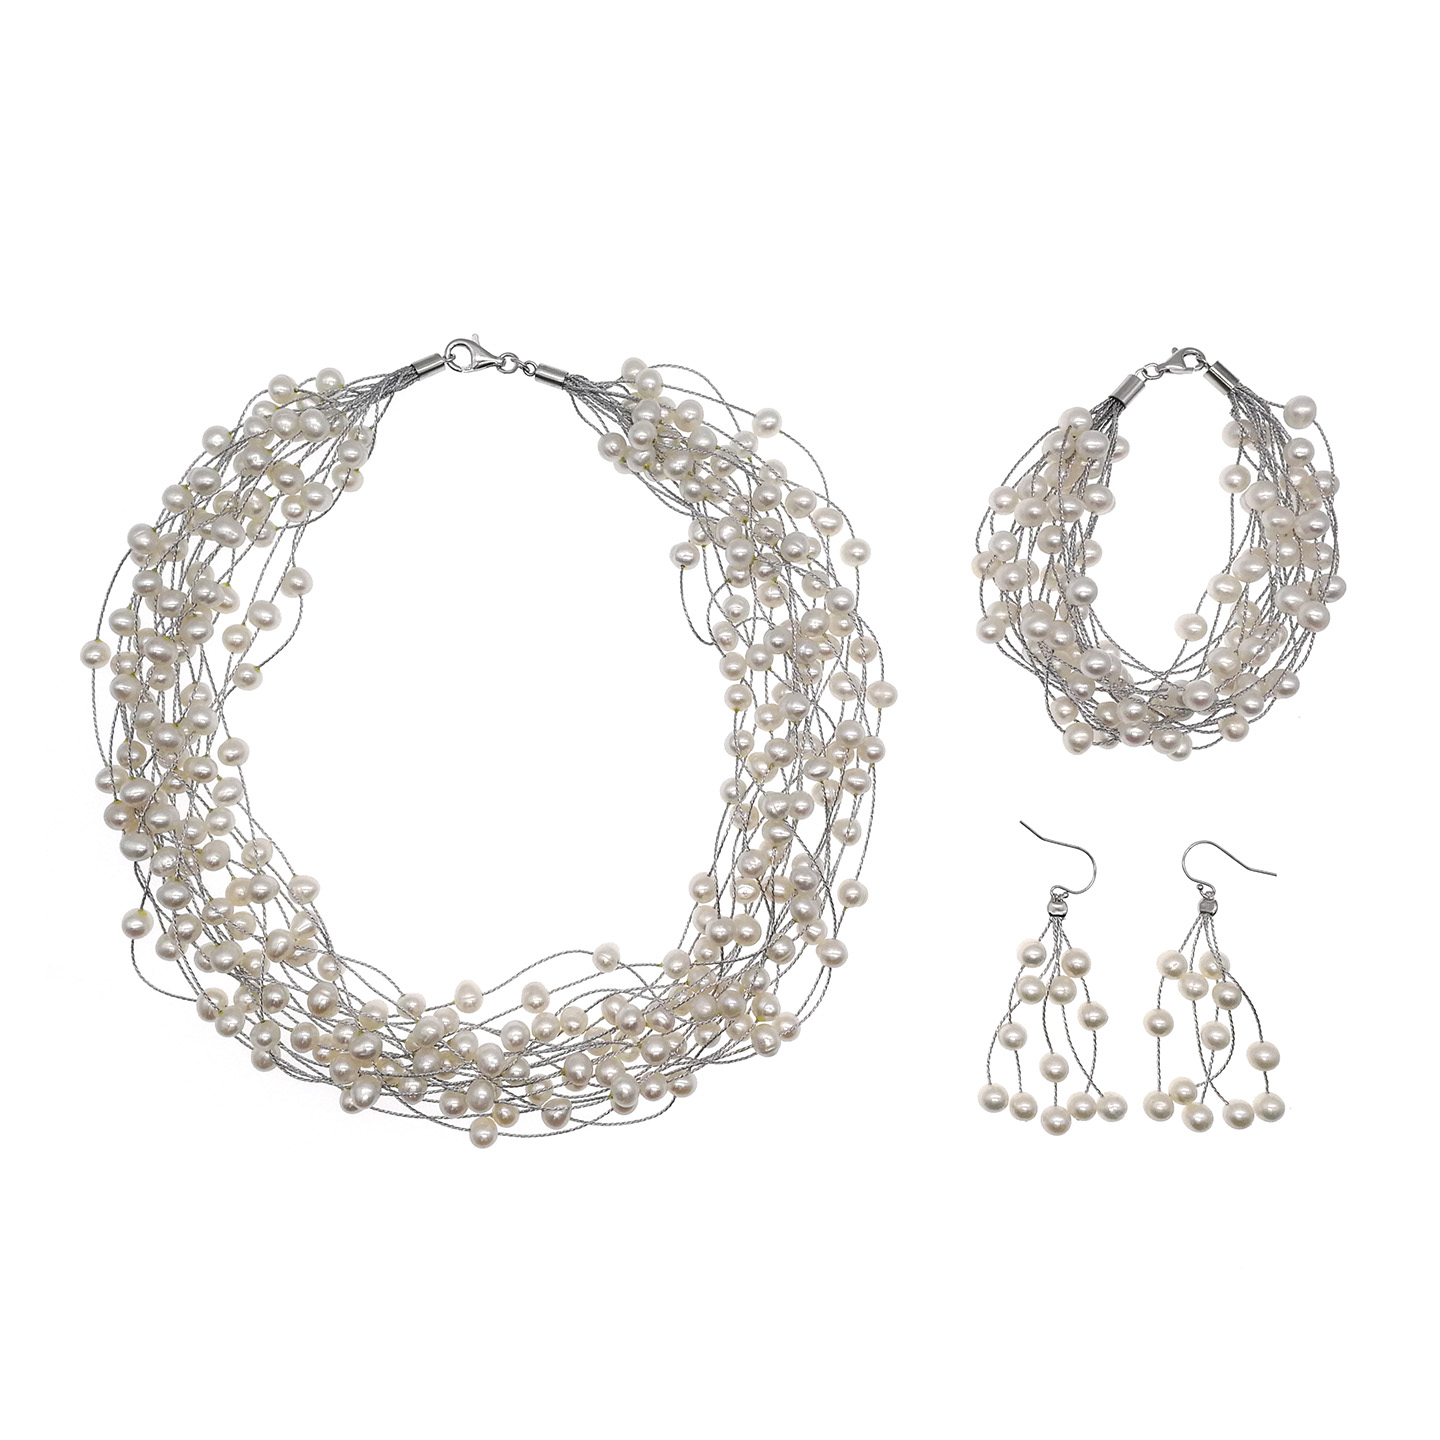 6-7mm Freshwater Pearl with 925 Silver Necklace, Bracelet & Earring Set